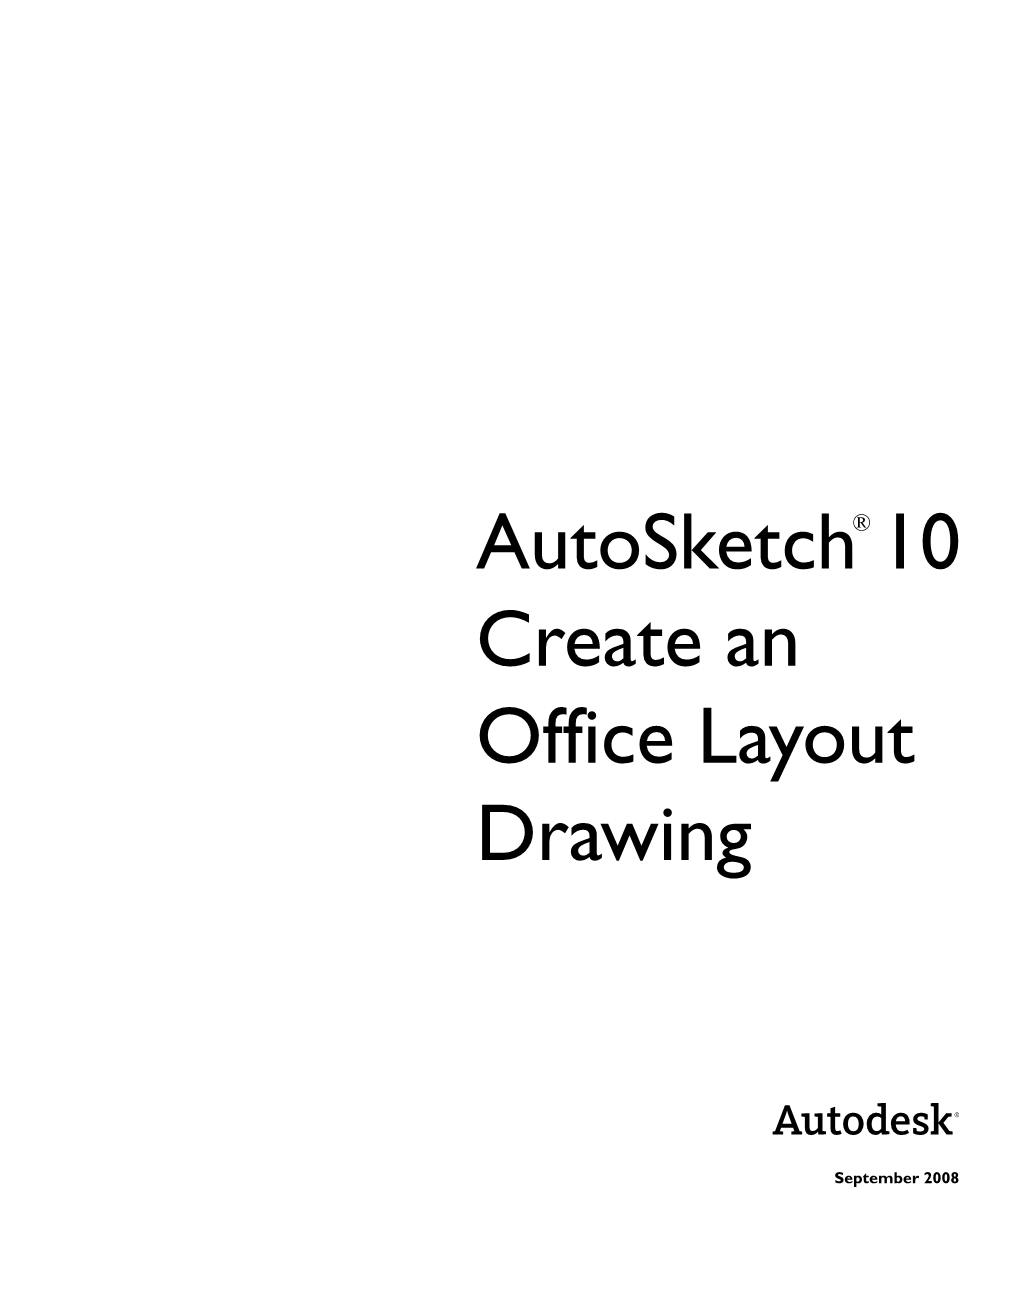 Autosketch 10 Create an Office Layout Drawing